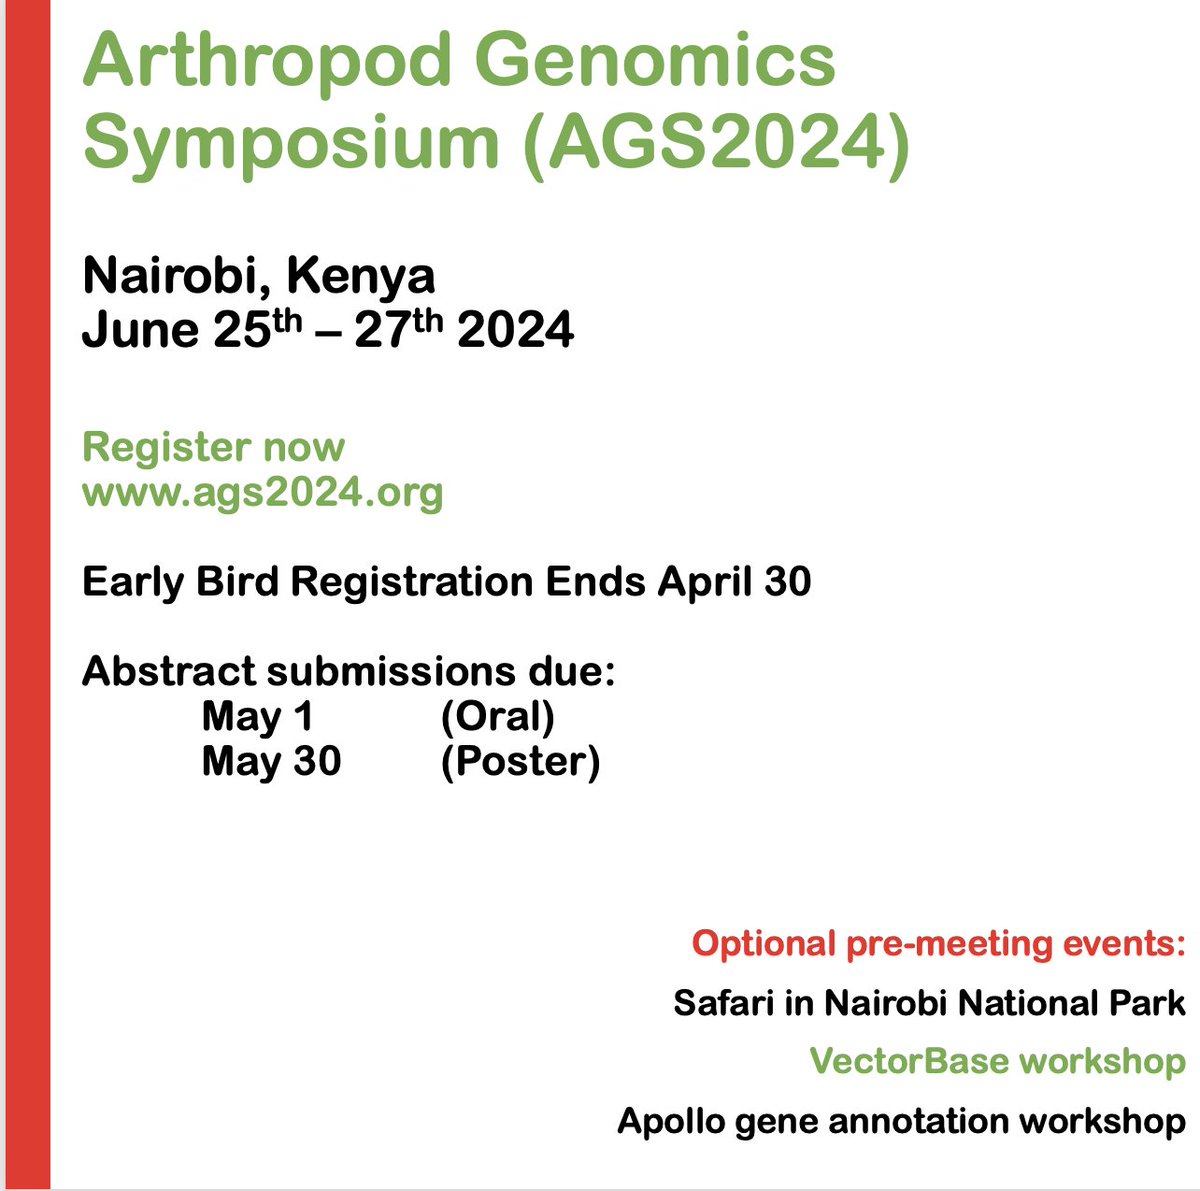 Have you applied yet for Arthropod Genomics Symposum 2024 in Nairobi this summer? [Organized by @NotreDame, @KEMRI_Kenya, and @pamcafrica]